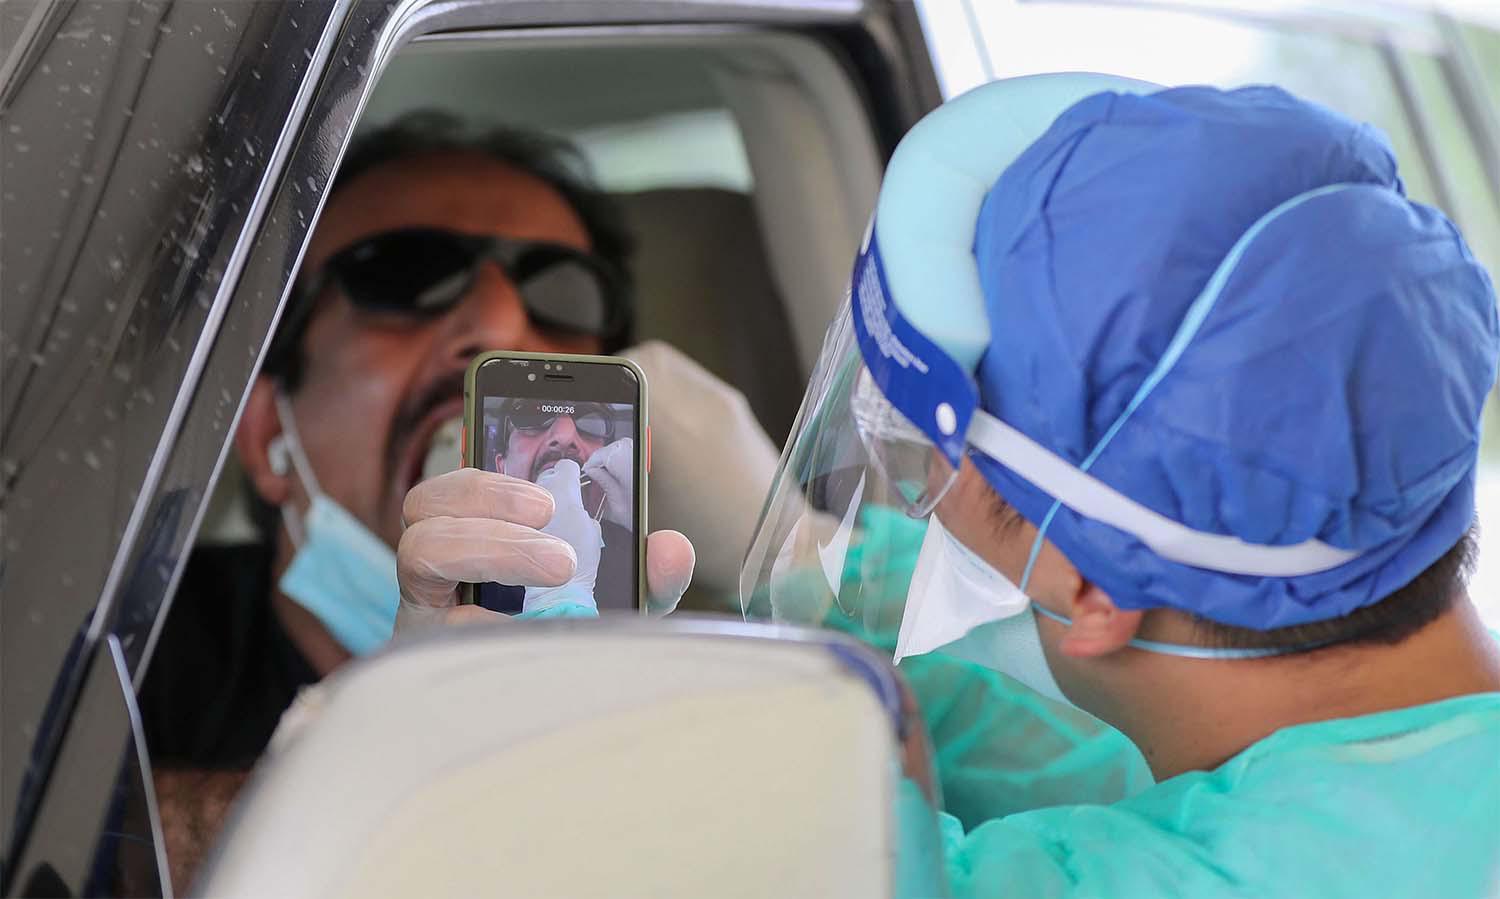 A health worker collects a swab sample from a man at a drive-thru testing service for COVID-19 coronavirus in Doha